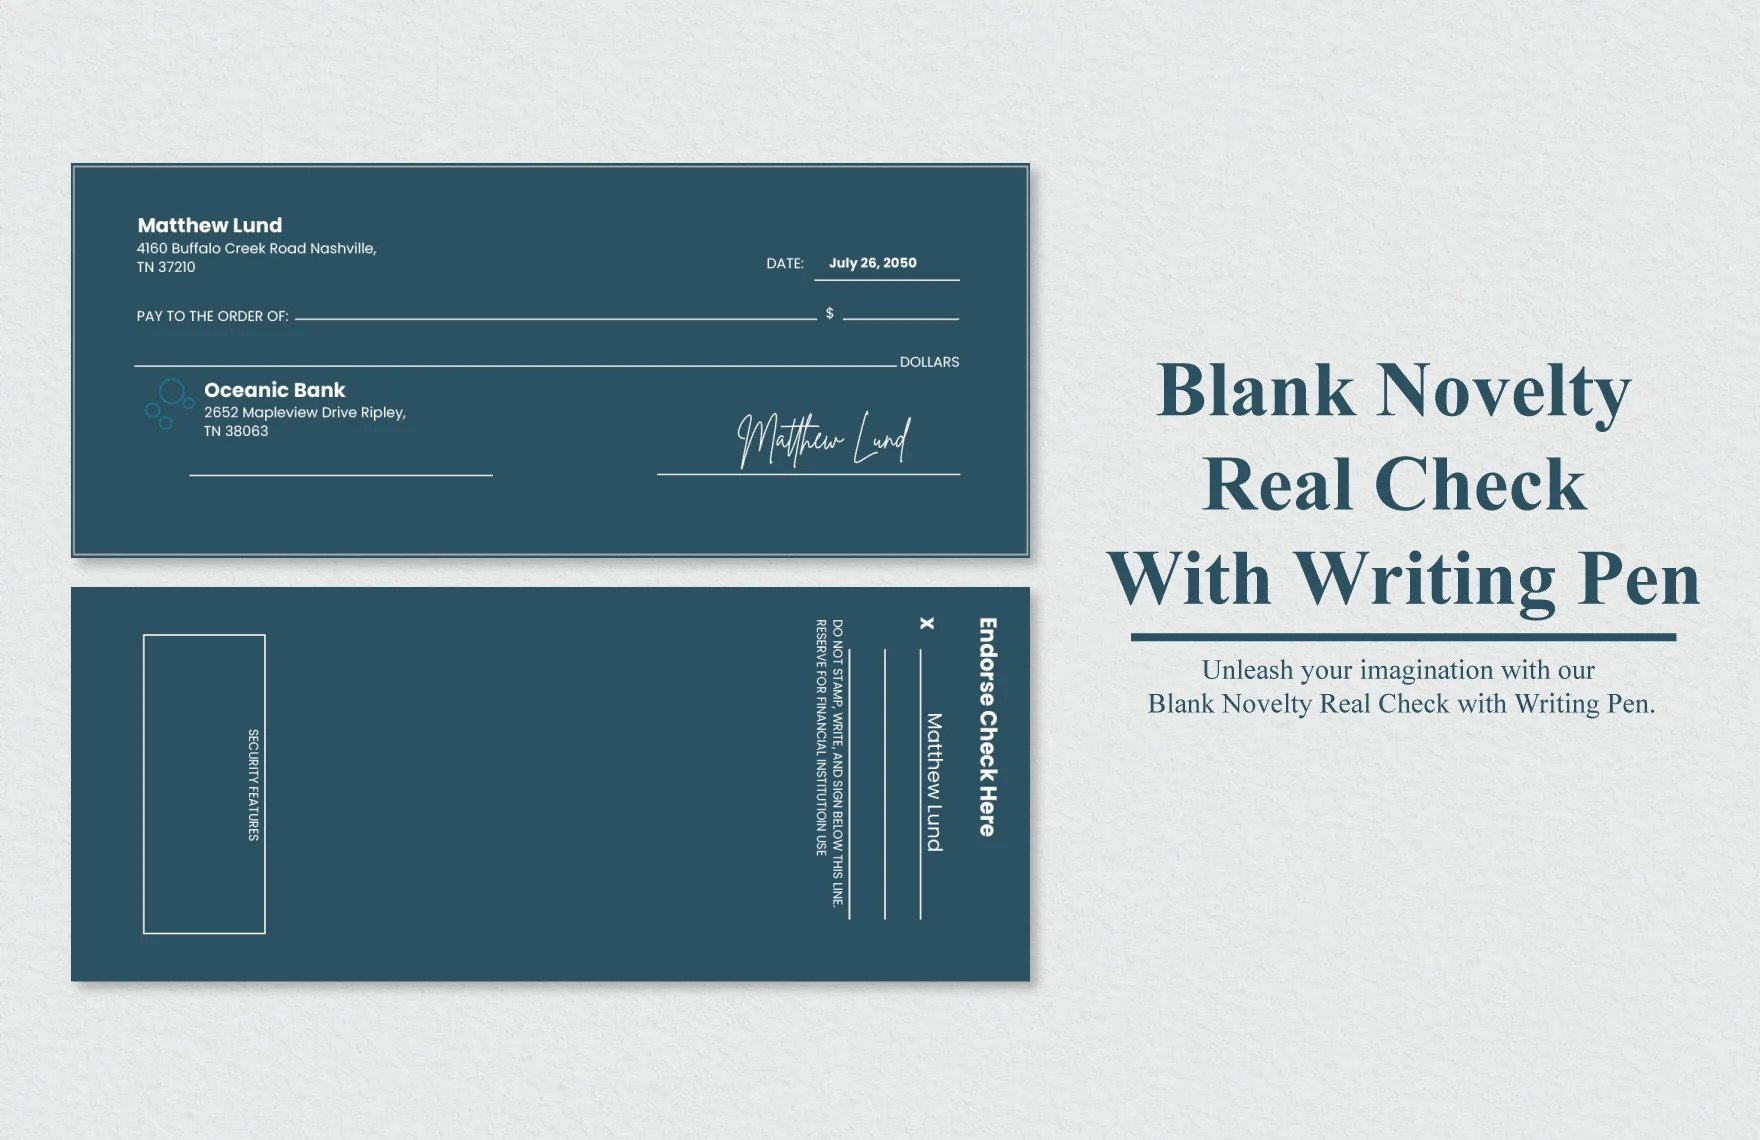 blank novelty real check with writing pen